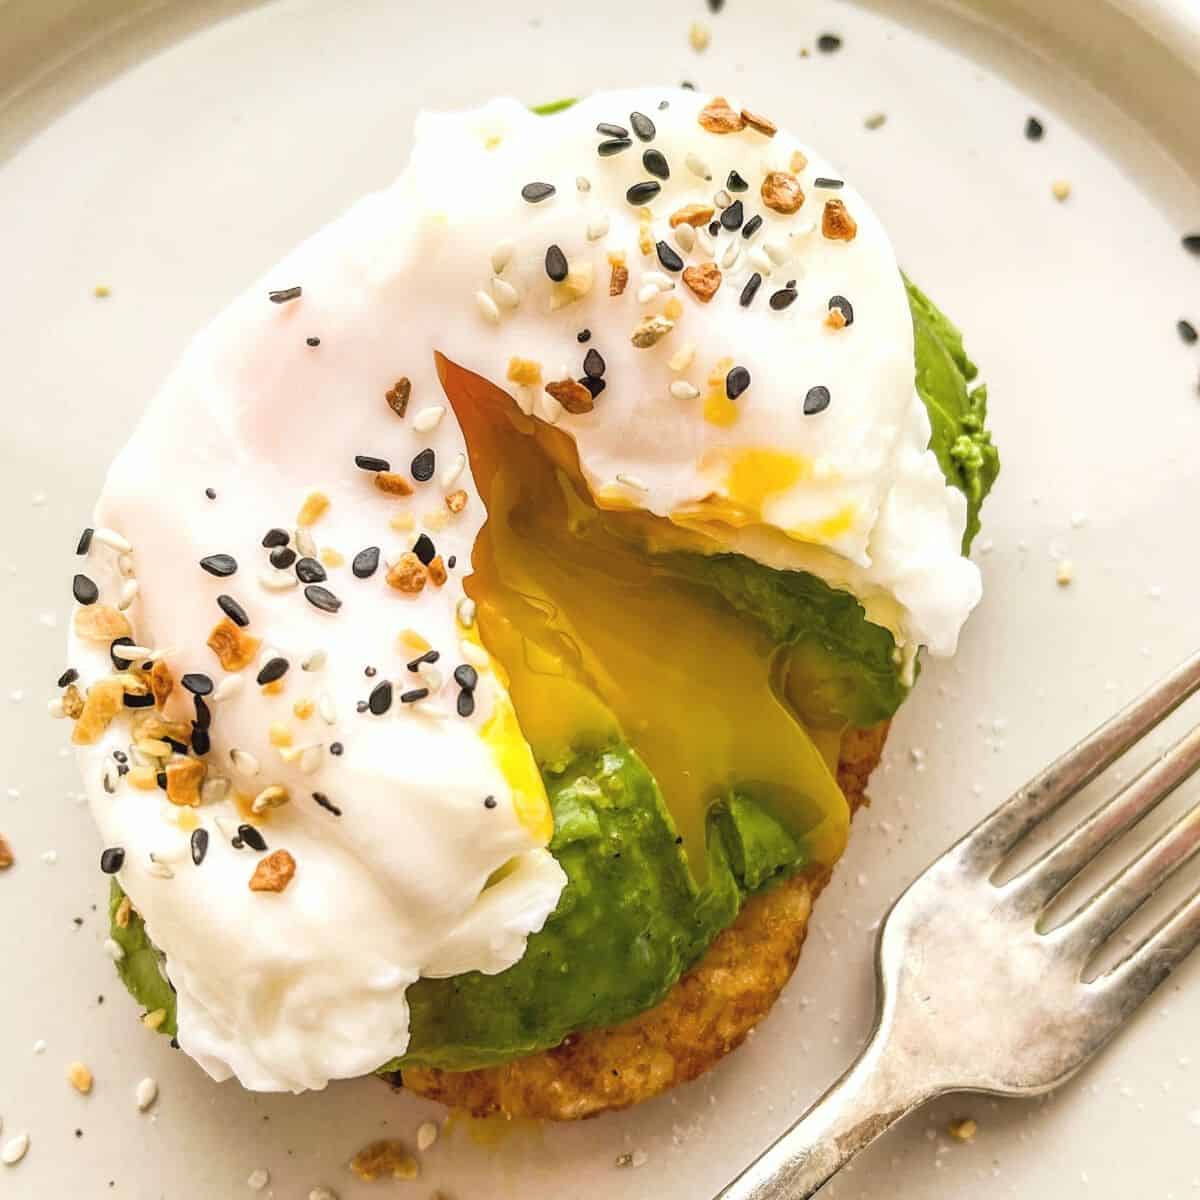 A poached egg, cut open, on top of avocado and a hash brown patty.